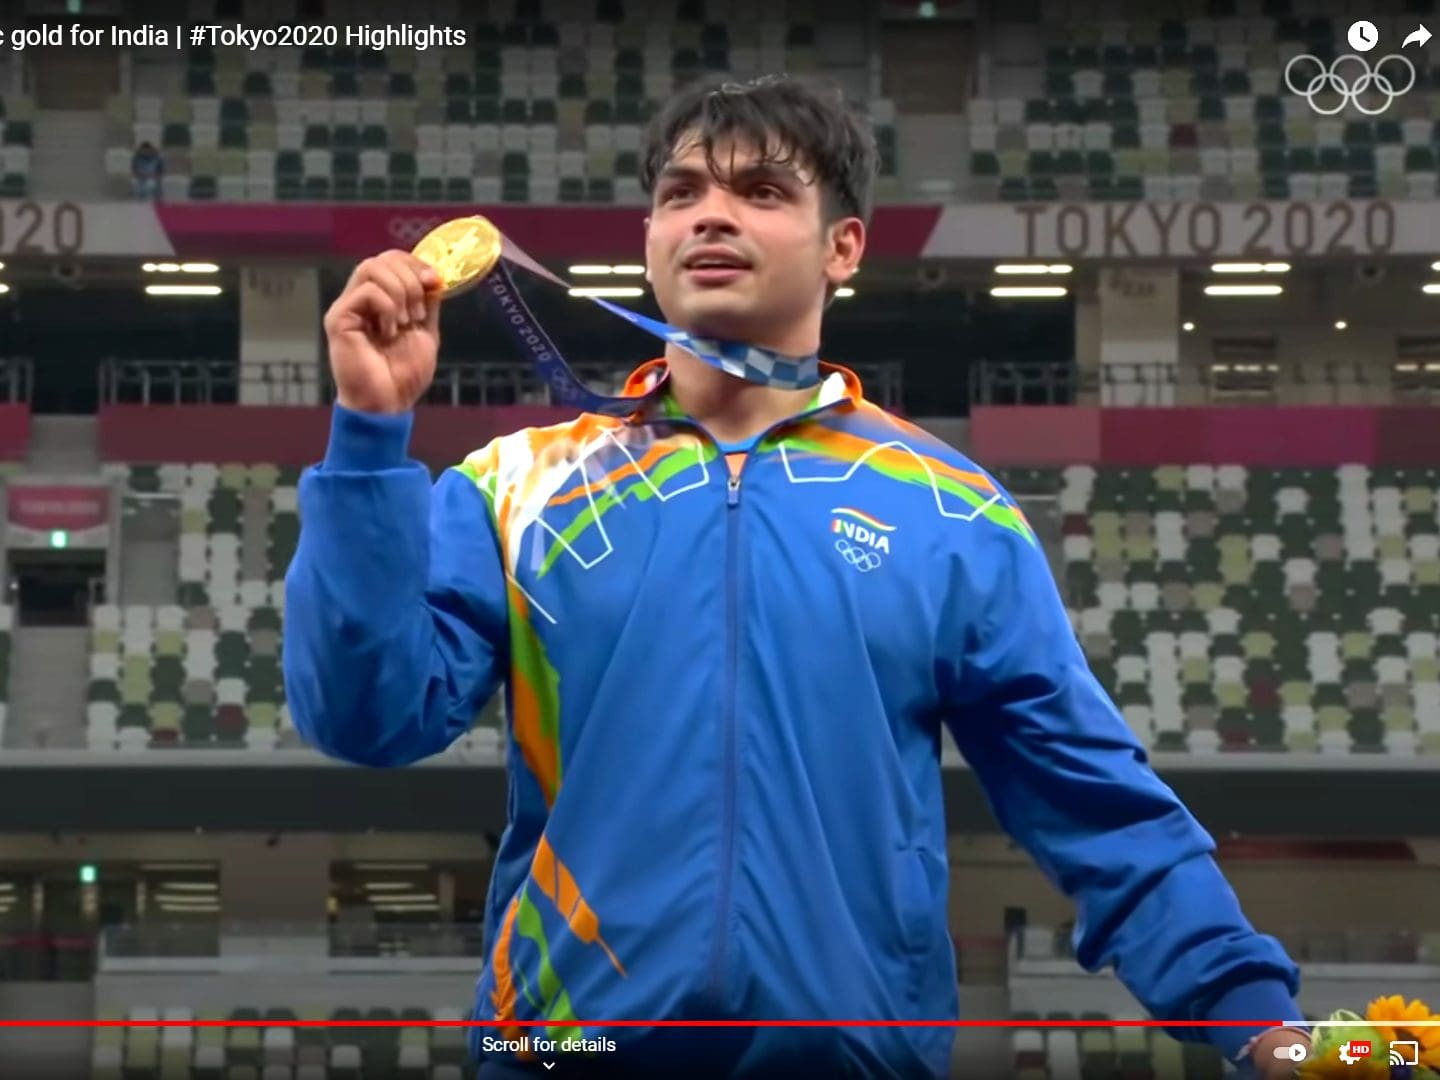 Javelin thrower Neeraj Chopra made history in the Tokyo Olympics by earning India's first gold medal in athletics.